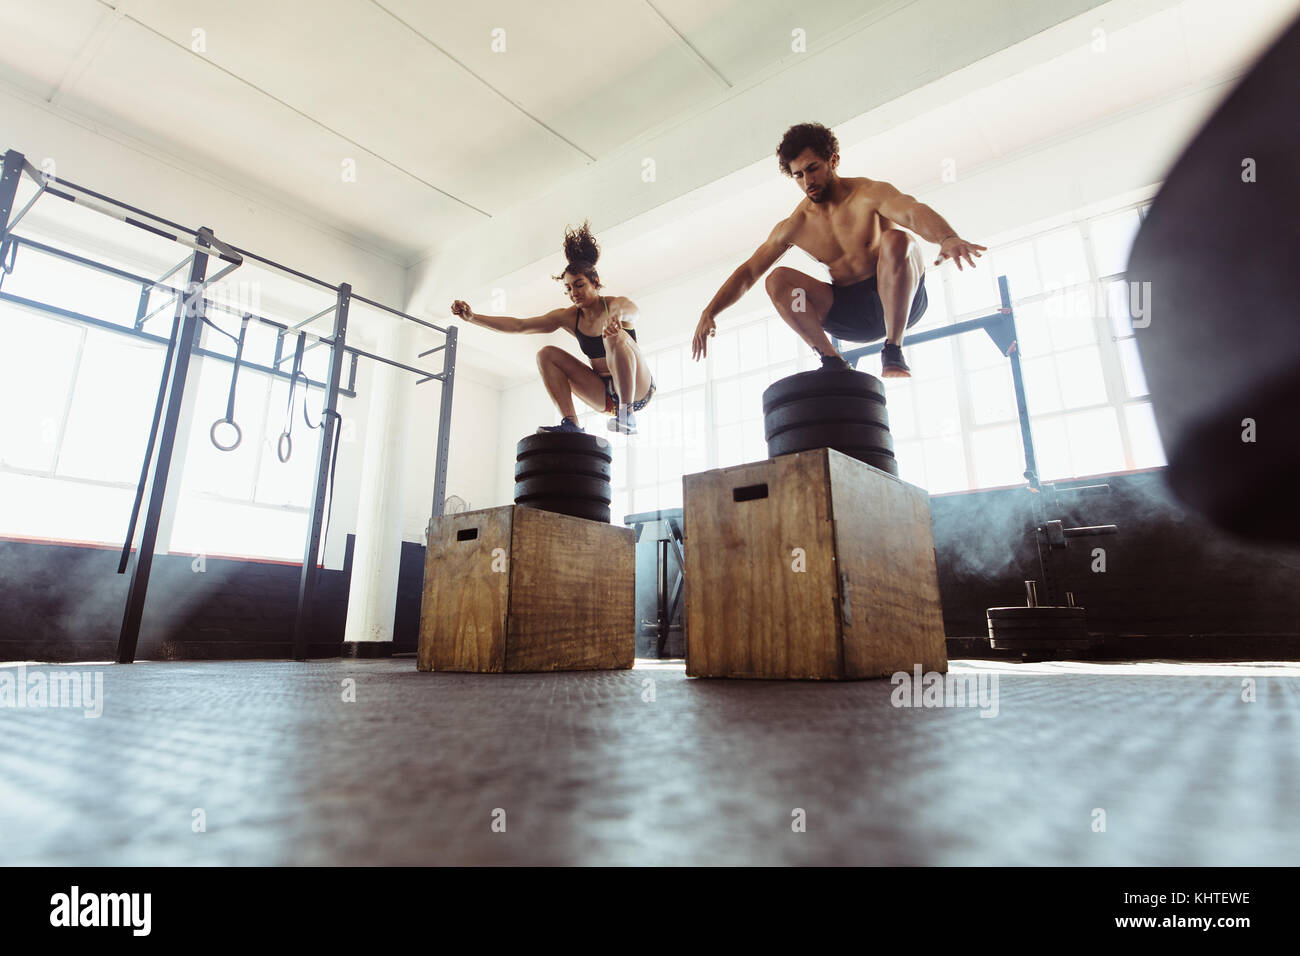 Healthy man and woman box jumping at gym. Fit young people doing cross training at health club. Stock Photo